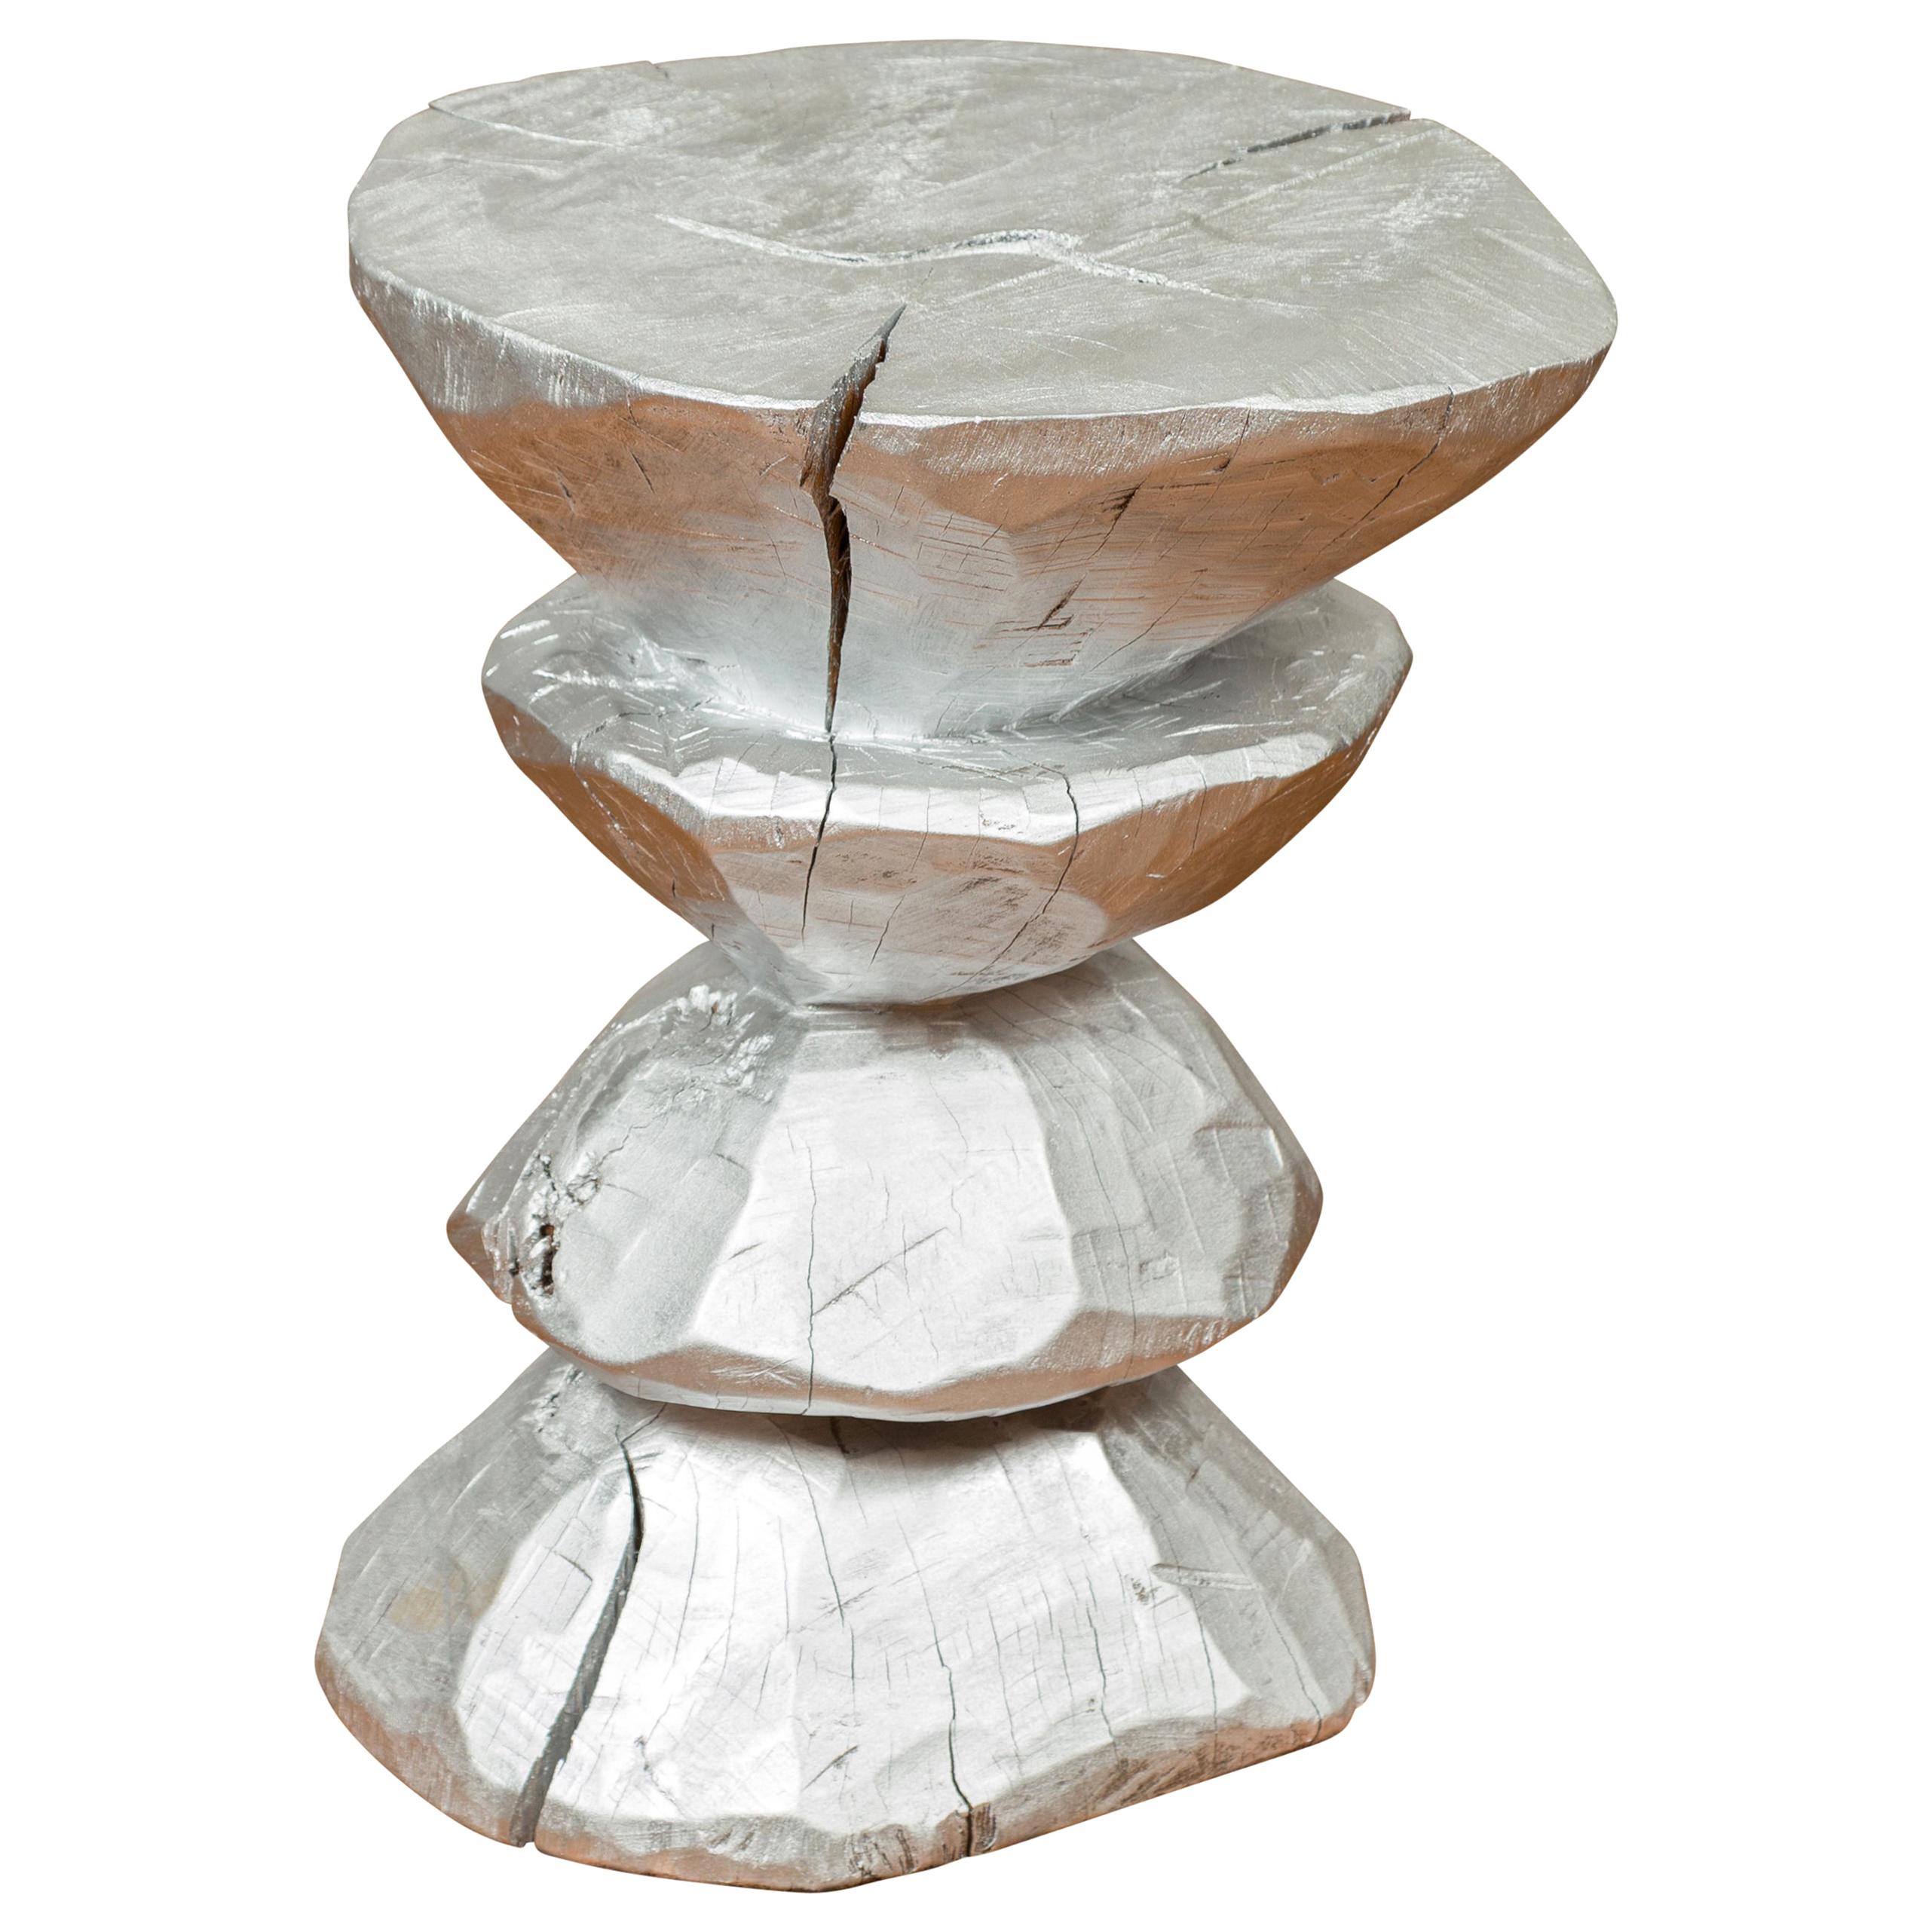 Silver-Colored Pedestal with Hourglass-Inspired Shape with Rustic Character